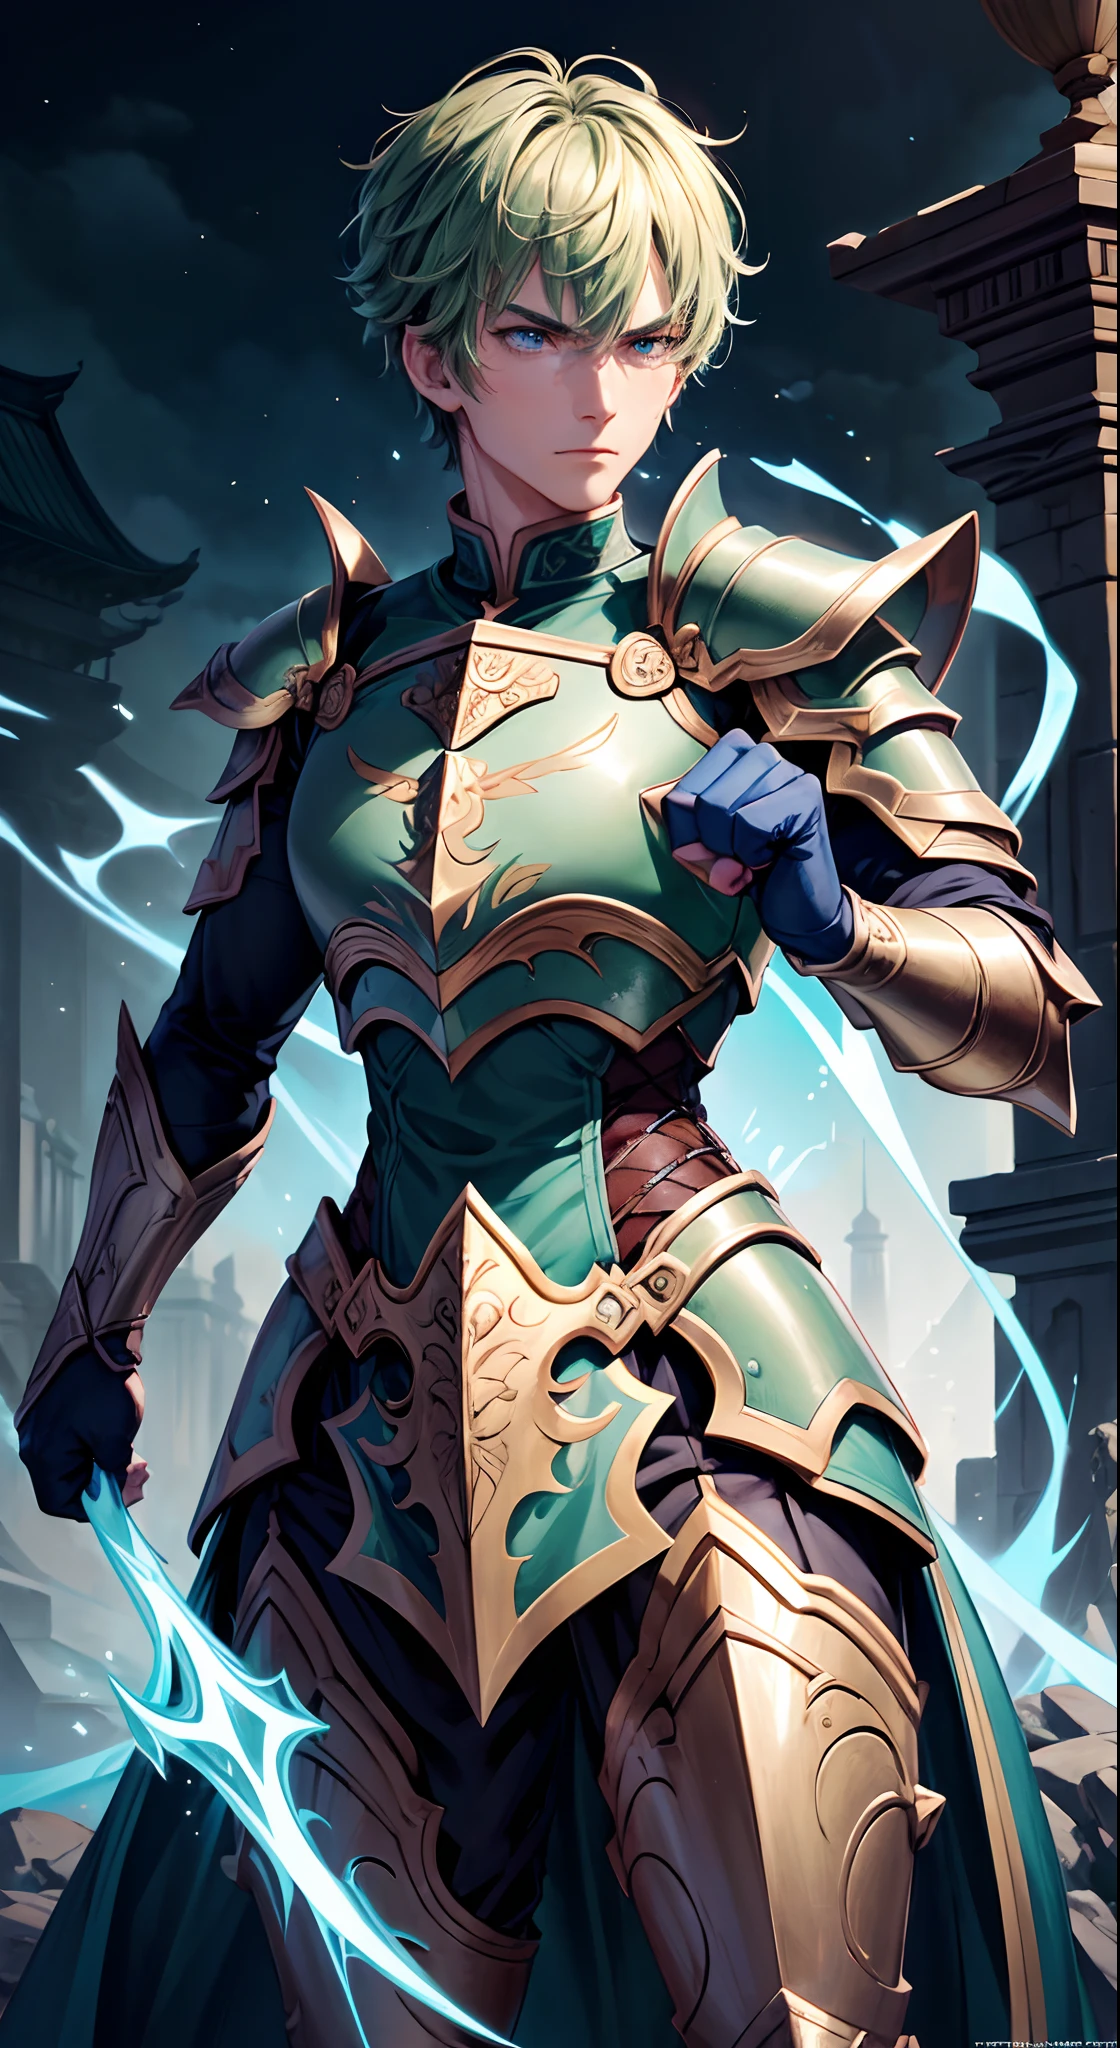 best quality, masterpiece, 1boy, 1man, human, paladin warrior, ([light blue color|deep green color:0.85] short hair), red eyes, (detailed face, detailed eyes), looking to camera, full body, upper body, light armor, illustration, temple background, vibrant colors, sharp focus, powerful presence, luminous lighting, mythical atmosphere, (fist in hand pose:1.5)